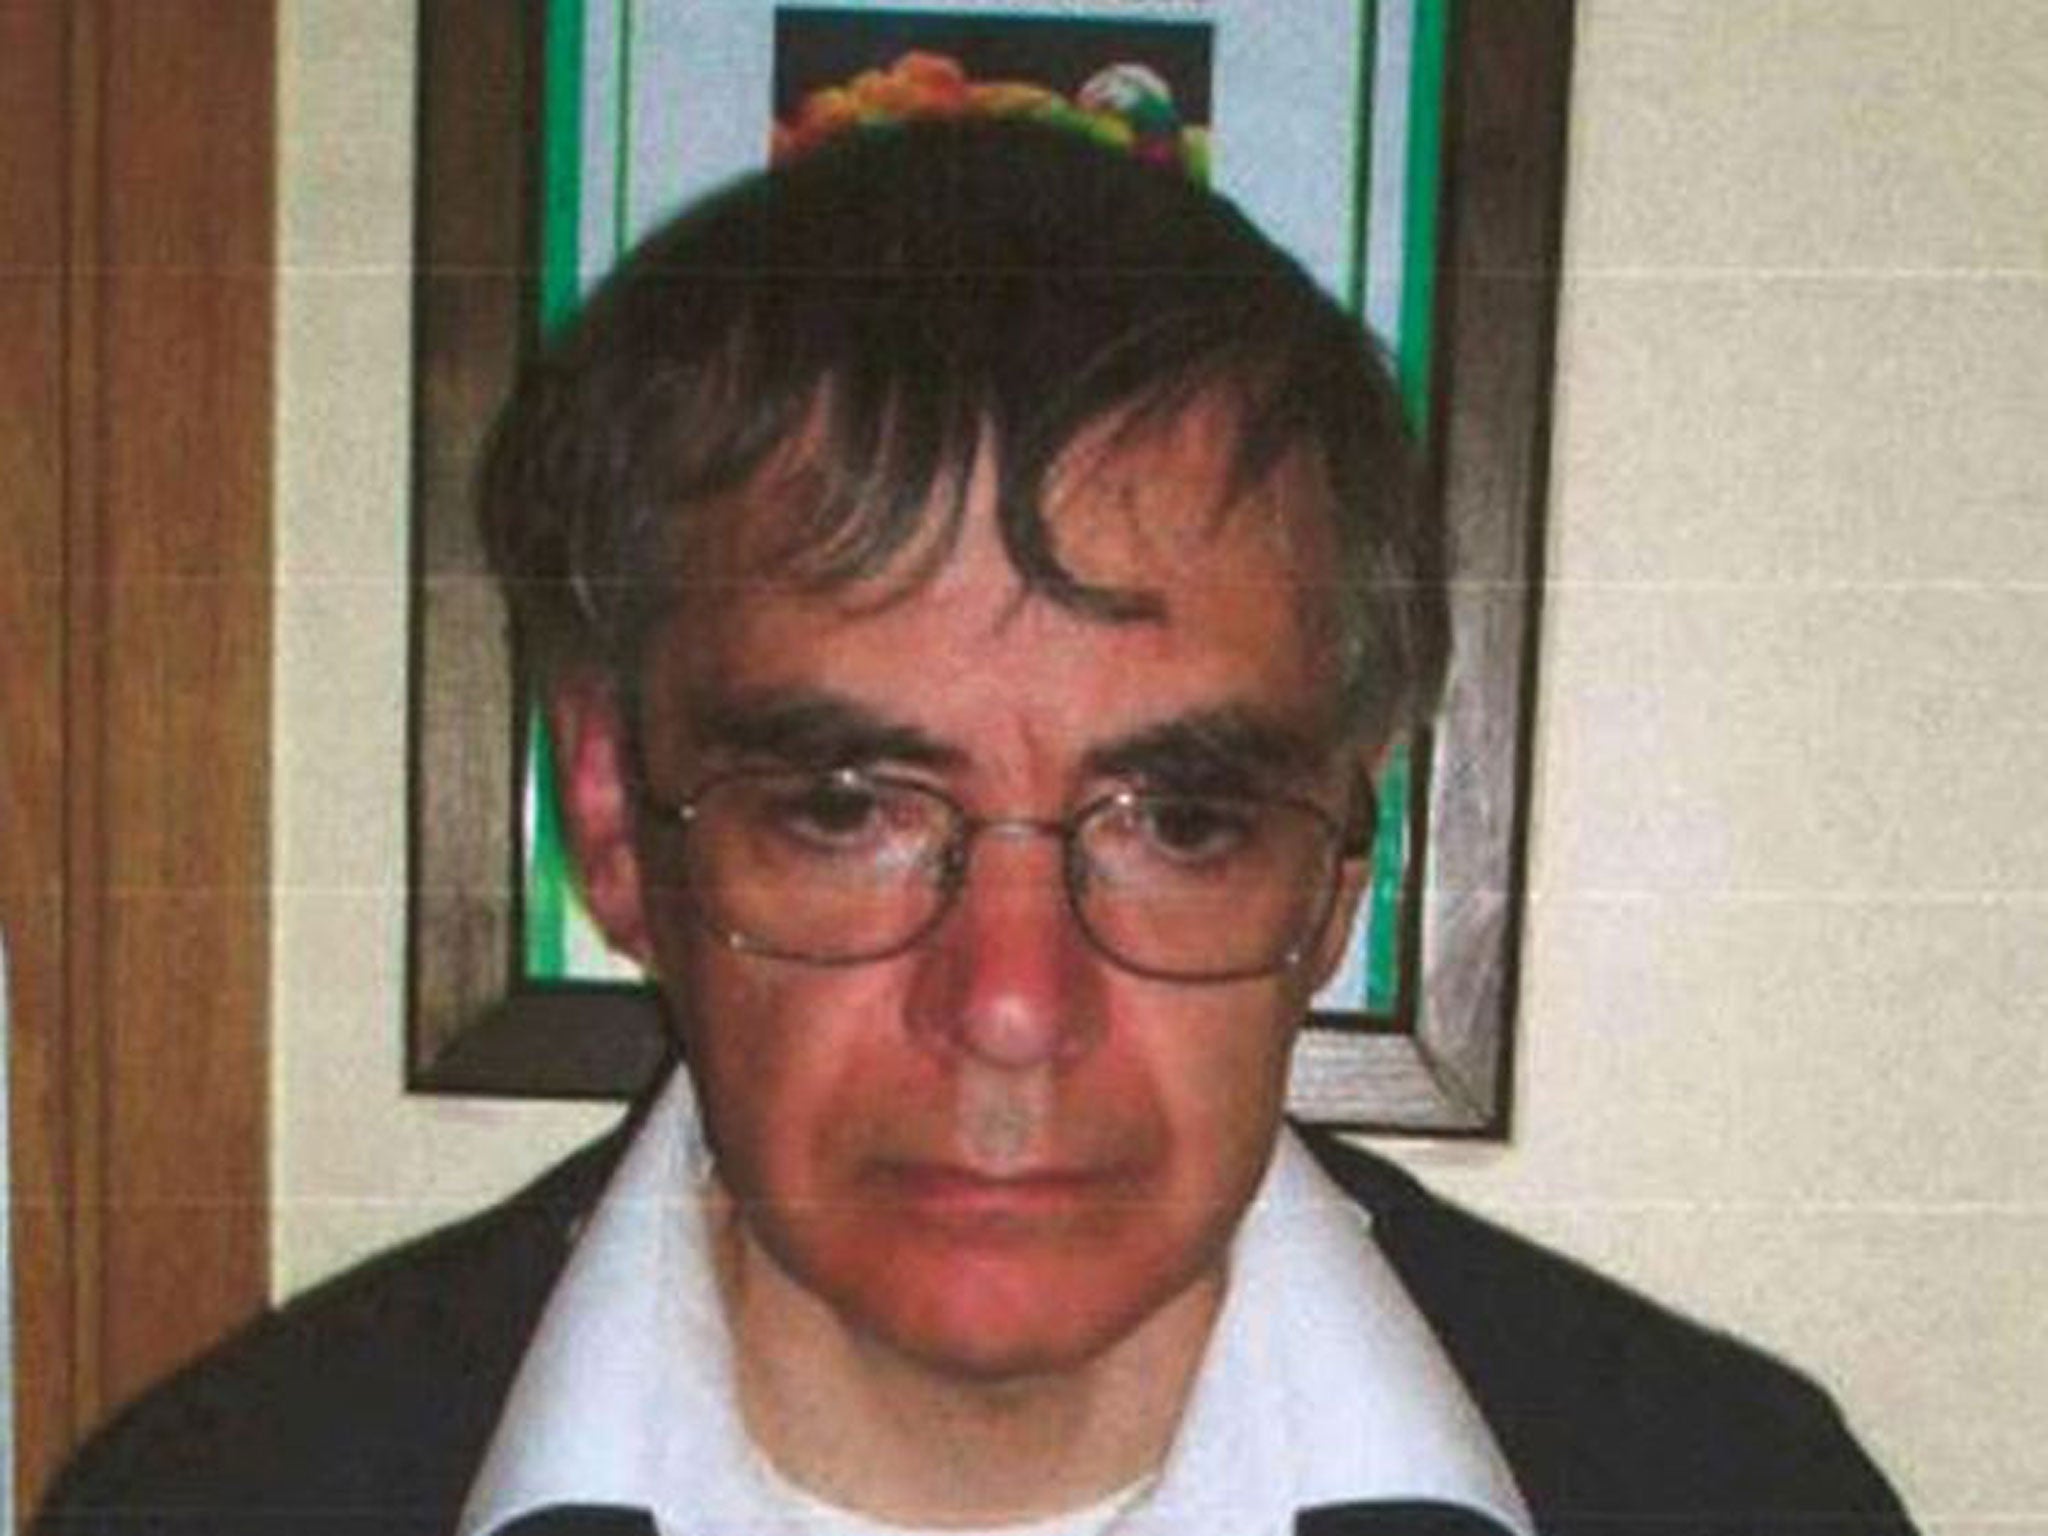 Daniel Rosenthal, 58, was last seen at around 14:30 BST on Saturday during an unsupervised walk around the gardens of Tatchbury Mount Hospital, Totton.